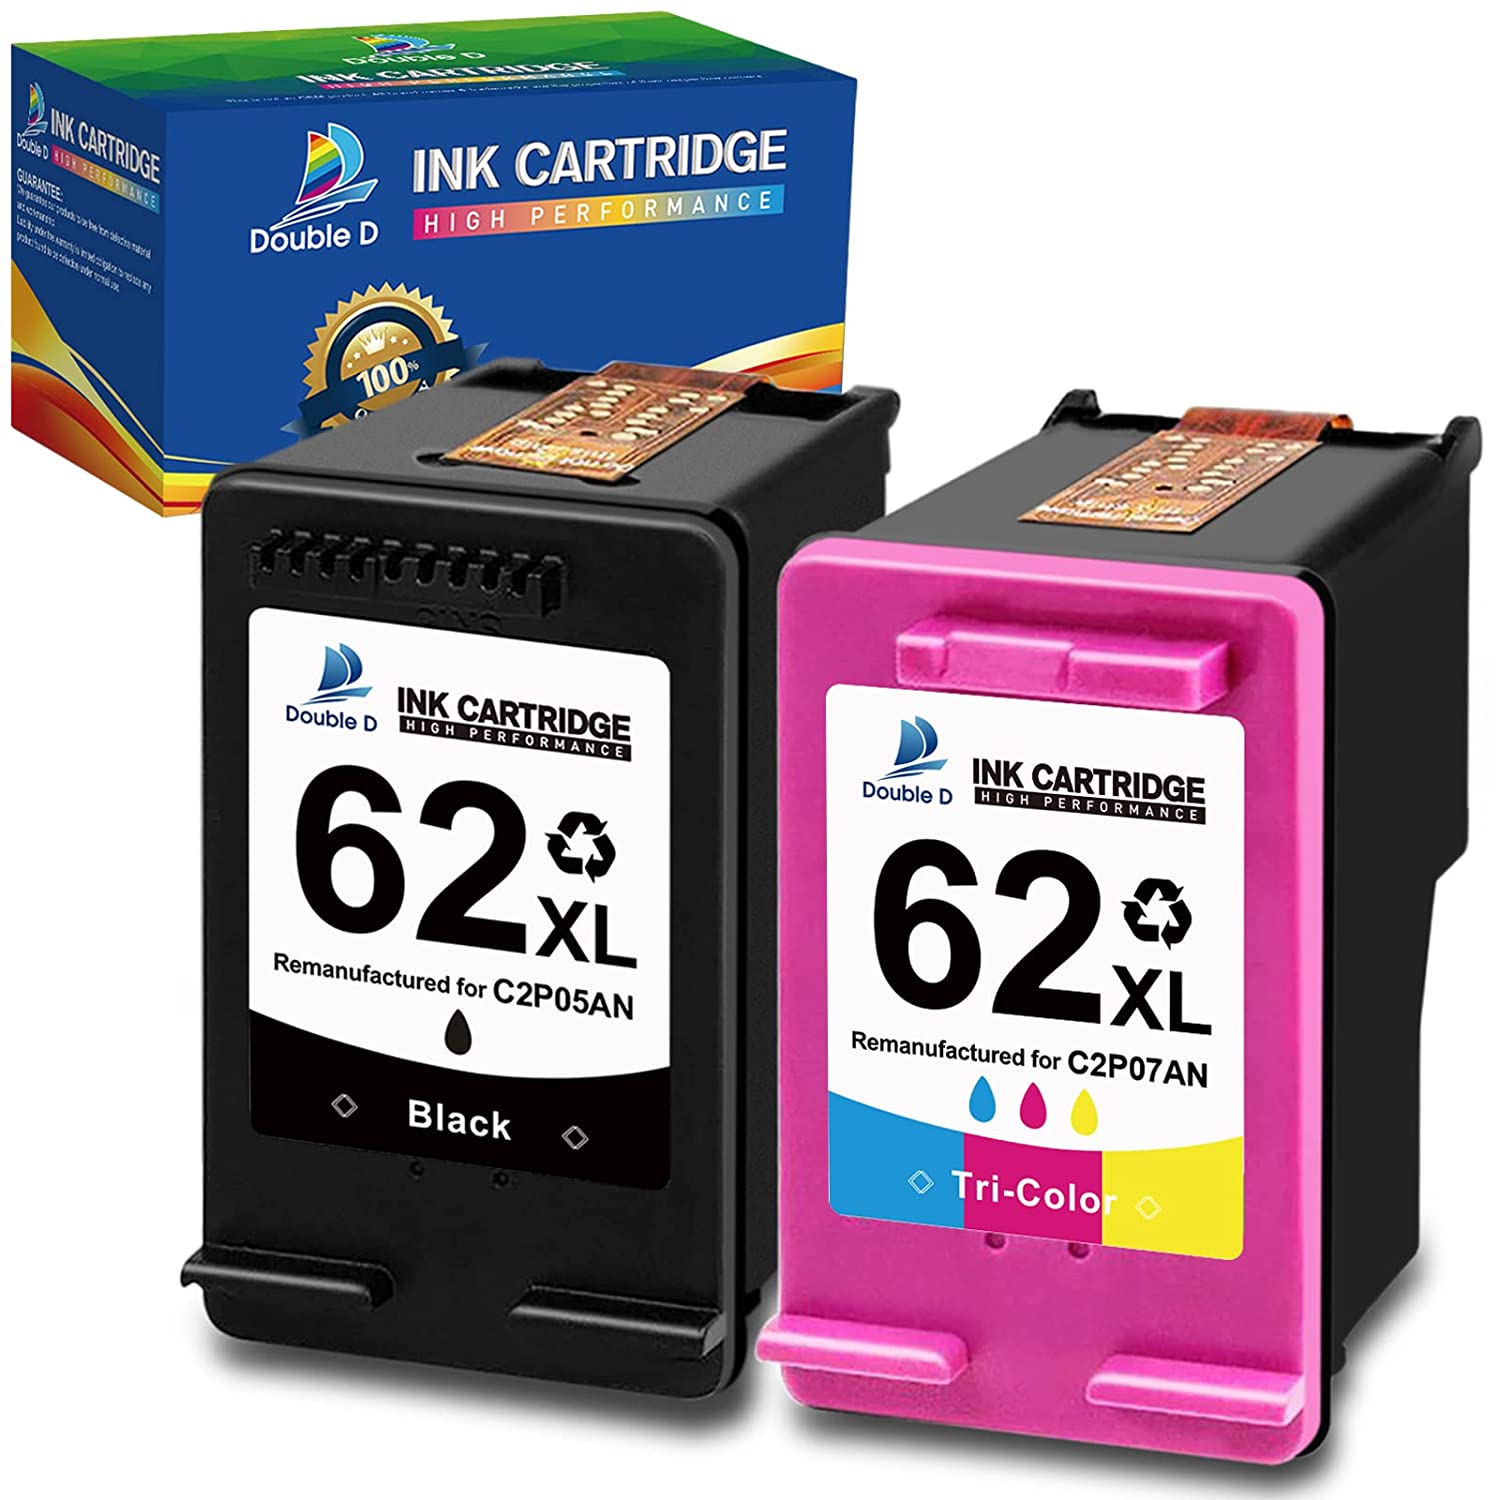 62Xl Ink Cartridge Combo Pack Replacement For Hp 62Xl 62 Xl For Envy 5540 5640 5660 7644 7645 Officejet 5740 8040 Officejet 200 250 Series Printer (1 Black, 1 T..